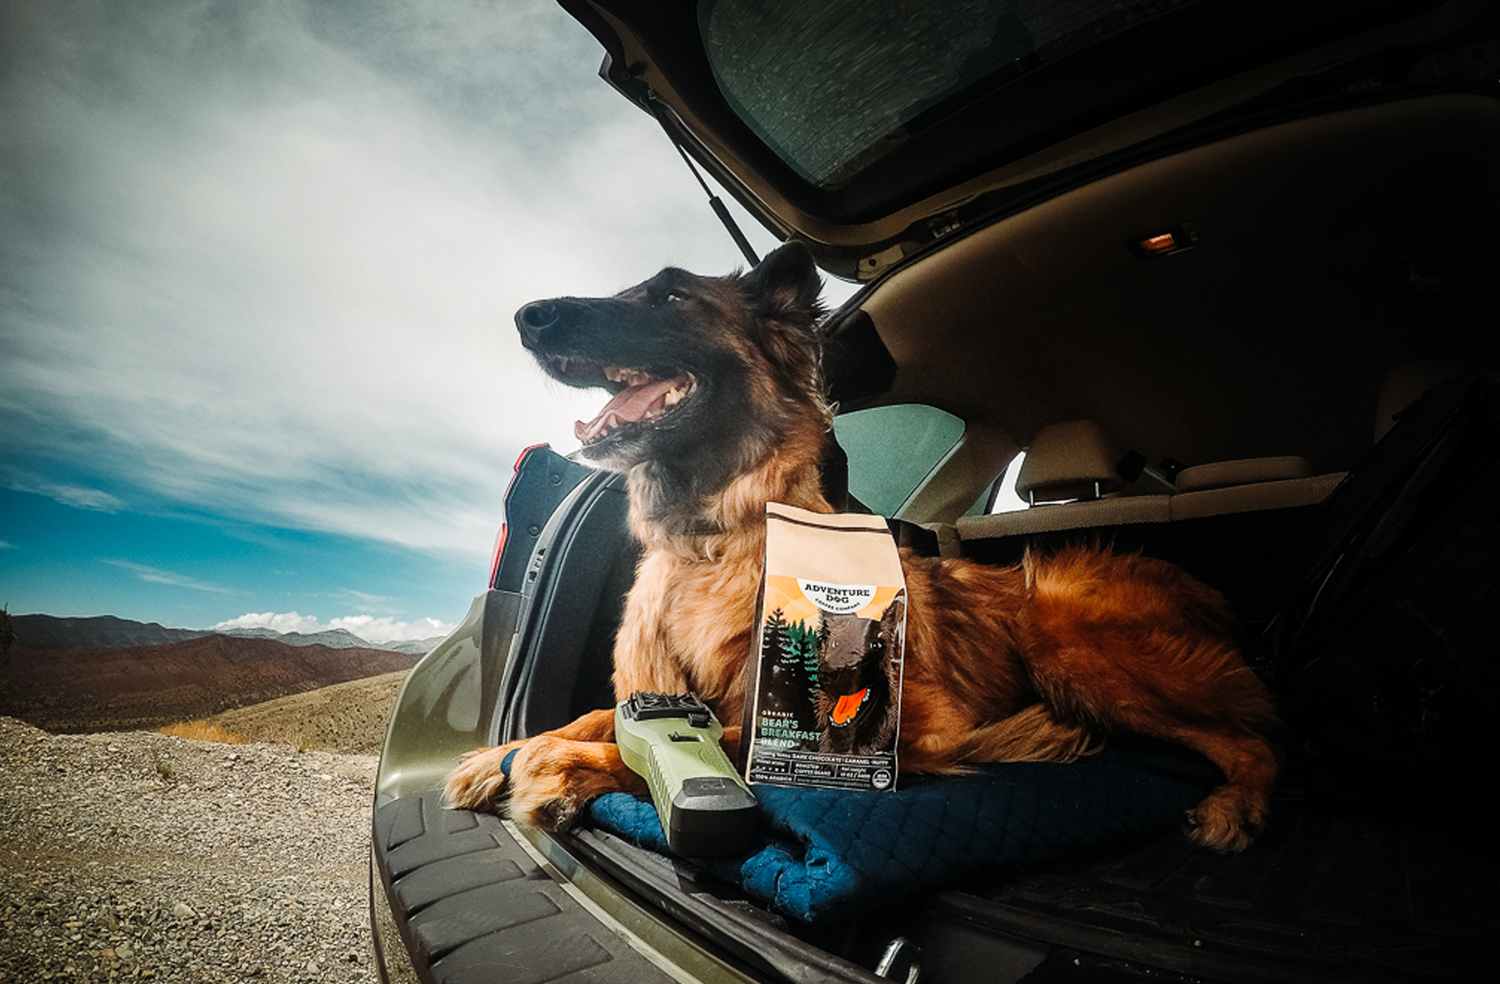 Bear enjoying the southwest mountains with a bag of his fresh-roasted Breakfast Blend coffee.